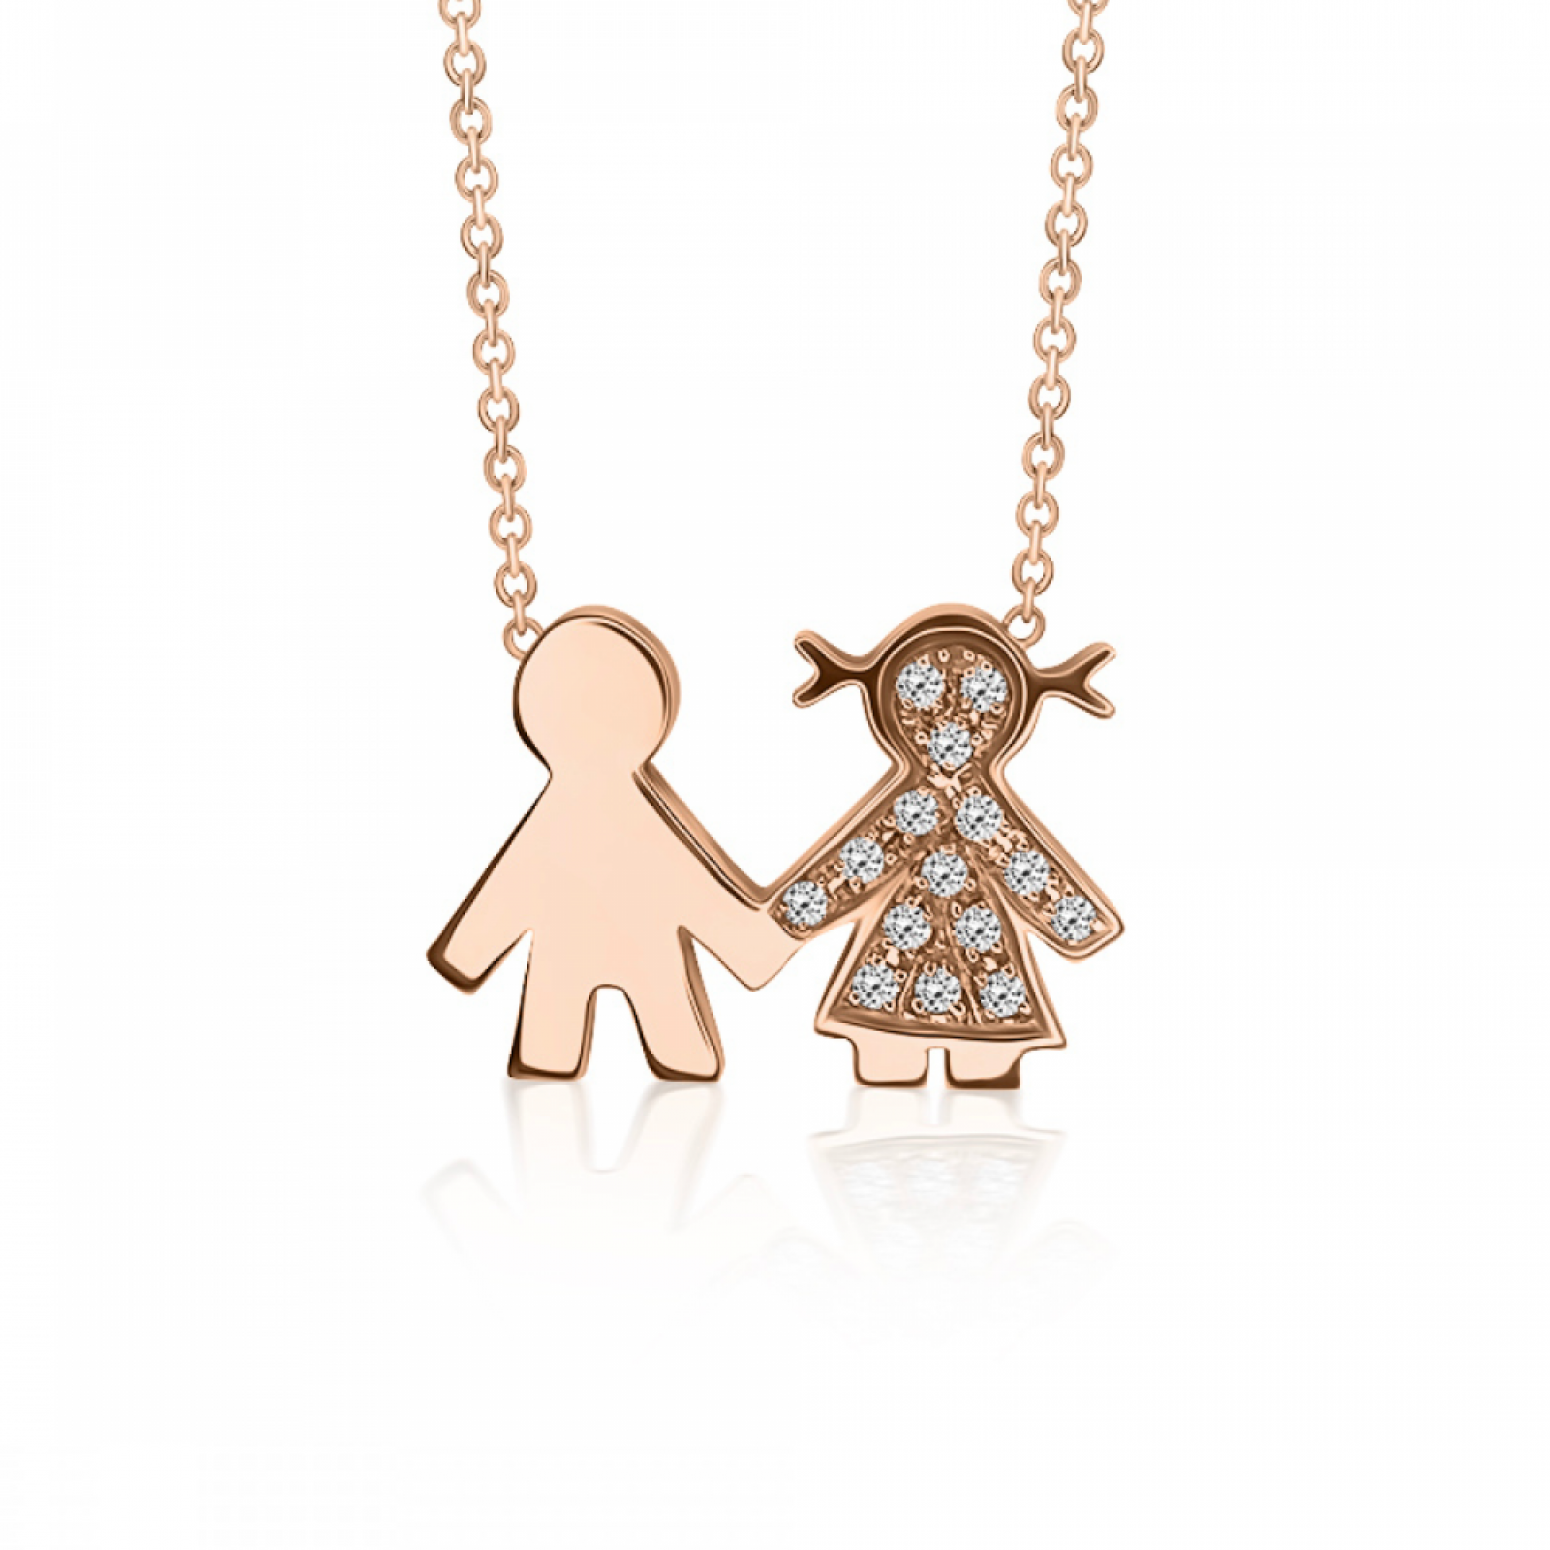 Necklace for mum, K18 pink gold with boy, girl and diamonds 0.07ct, VS1, H, ko3258 NECKLACES Κοσμηματα - chrilia.gr